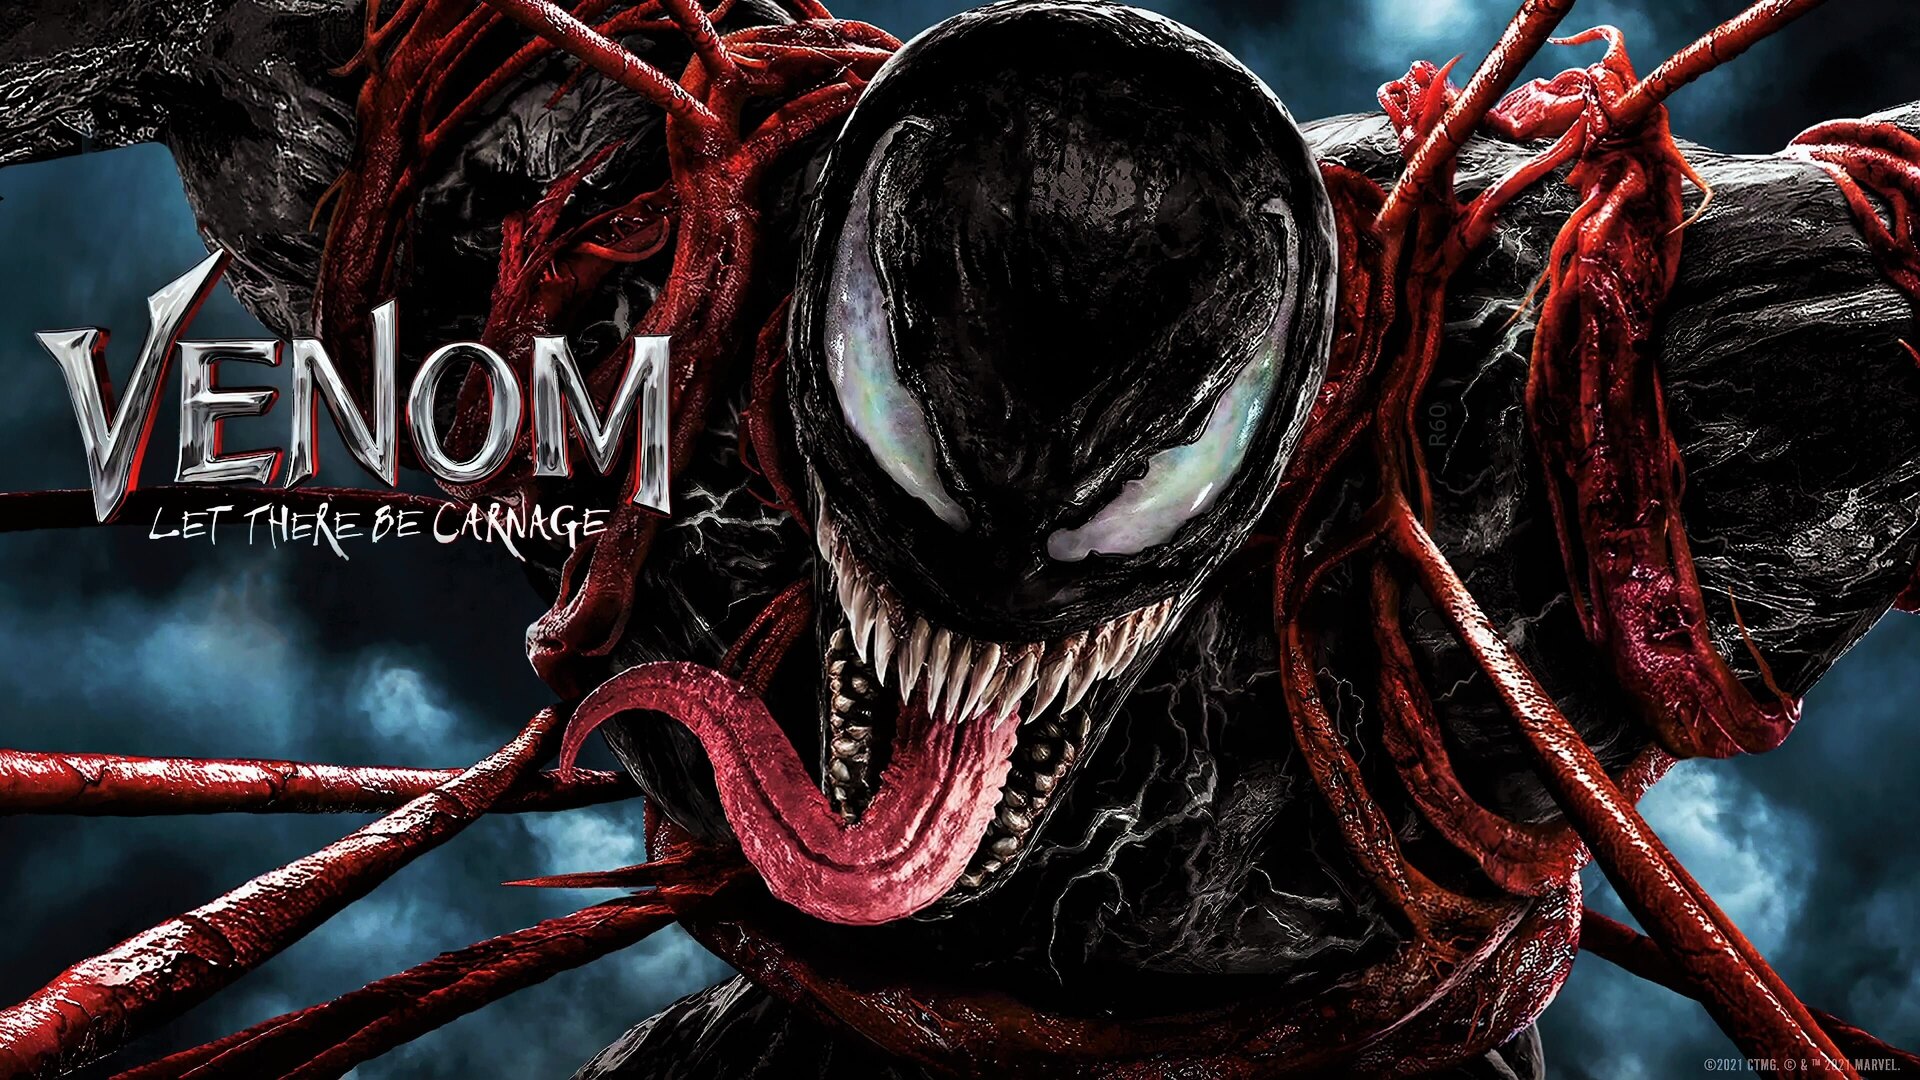 Streaming What App Can I Watch The New Venom Movie On Watch Recomendation